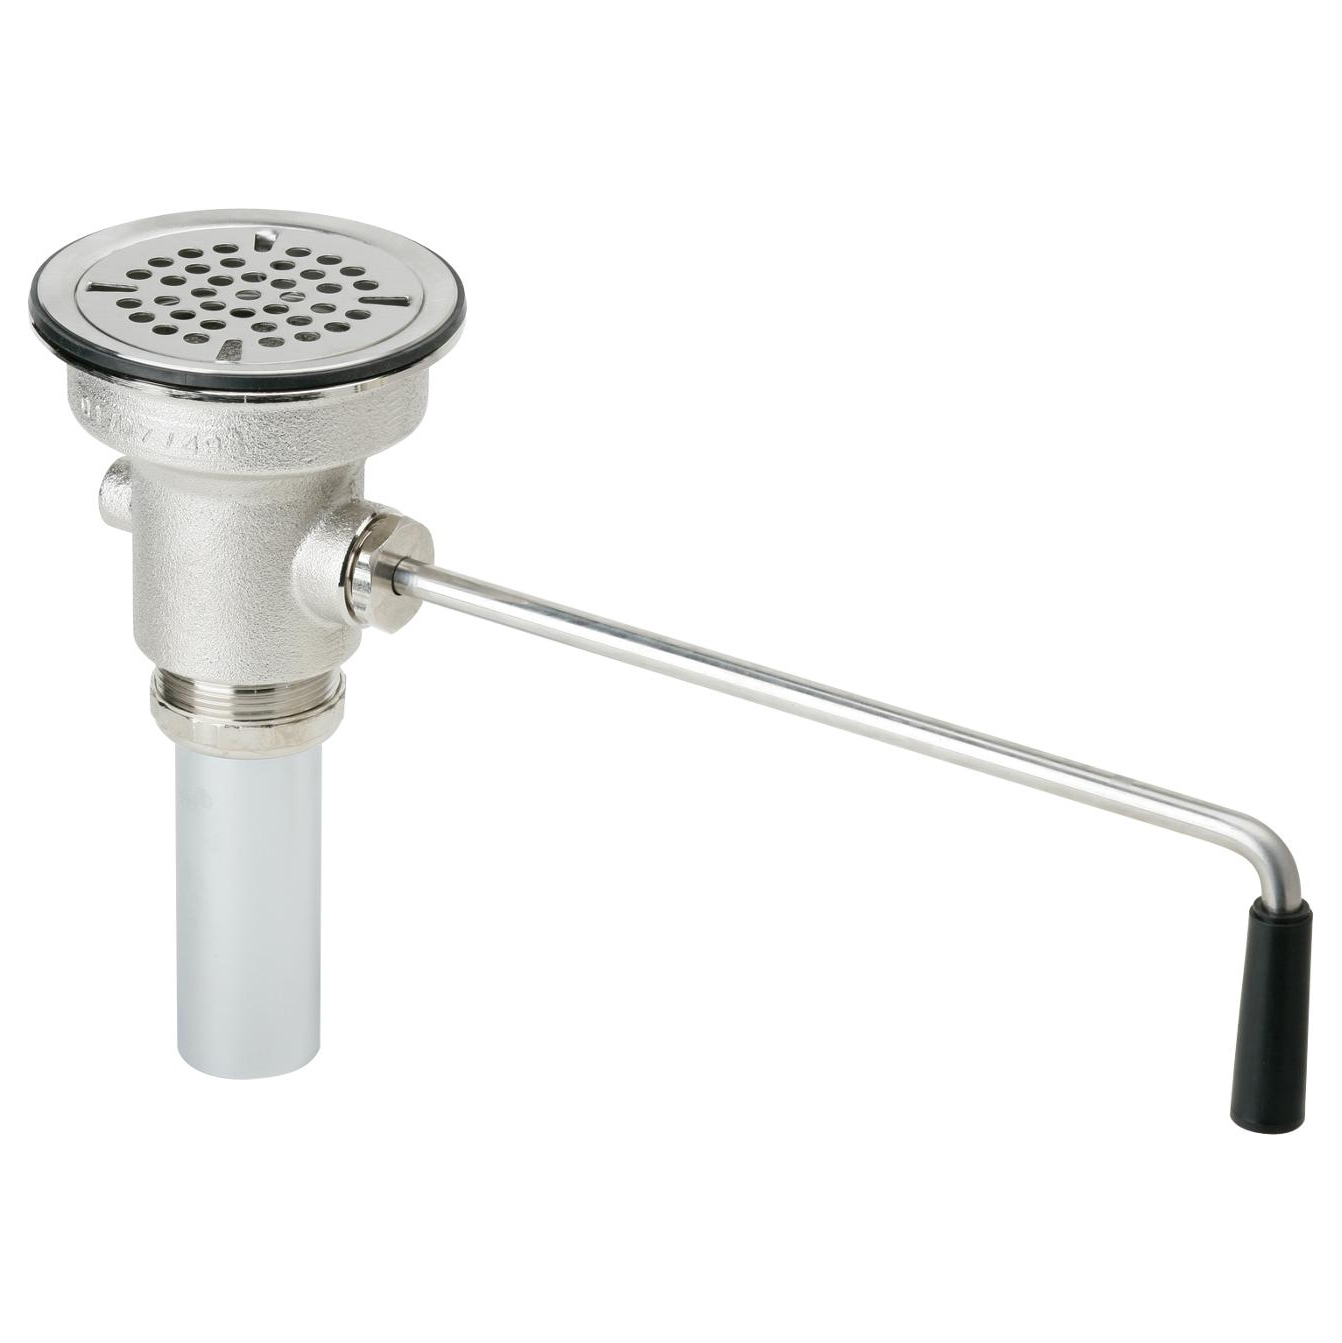 Drain Fitting Rotary Lever Operated w/2X4" Tailpiece